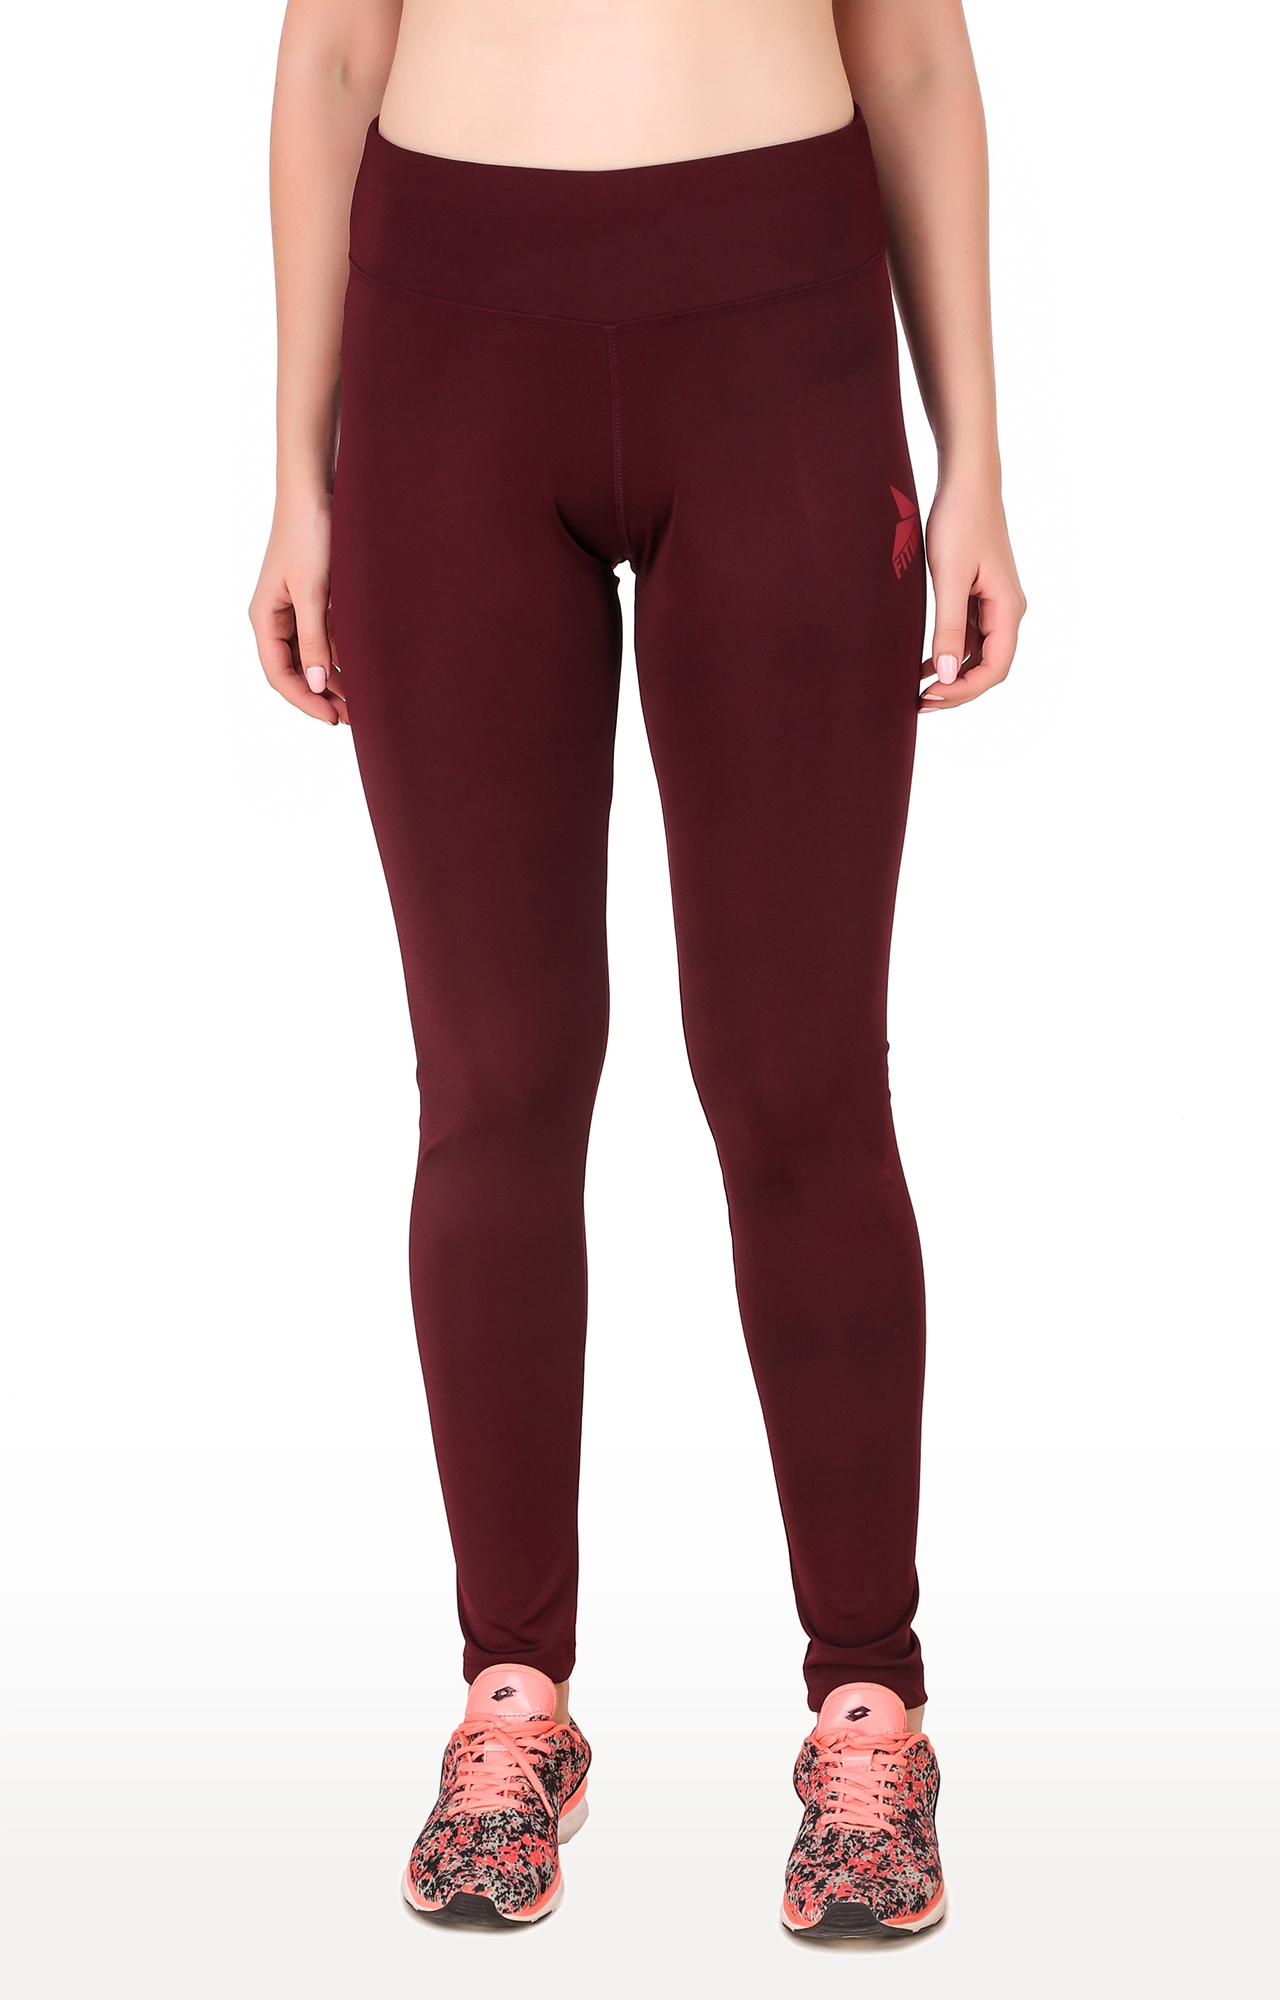 Fitinc | Women's Maroon Polyester Solid Tights 0